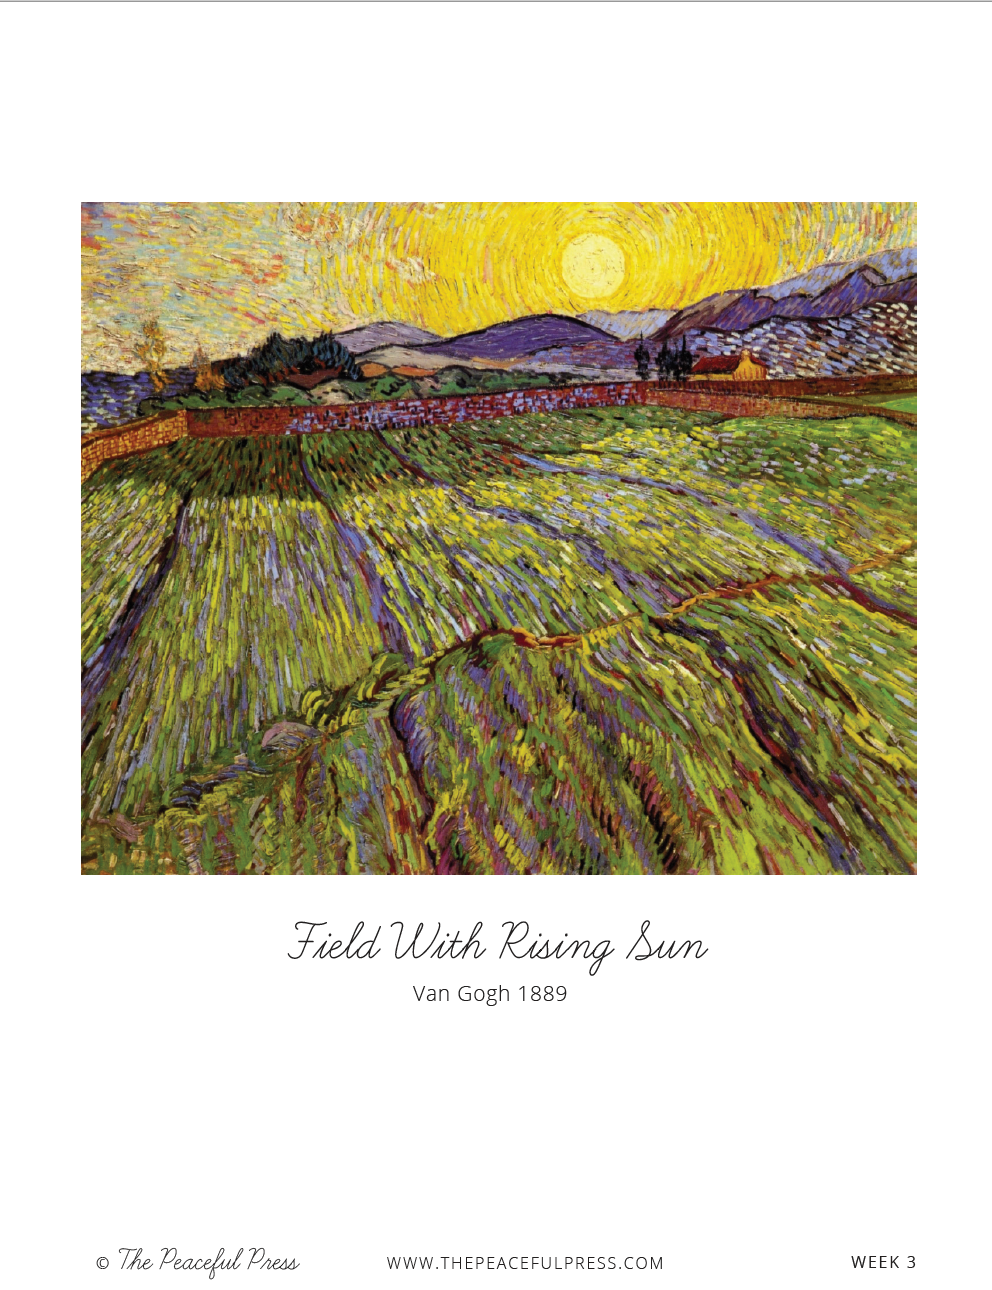 A sample of the homeschool picture study, with a print of Van Gogh's "Field With Rising Sun"